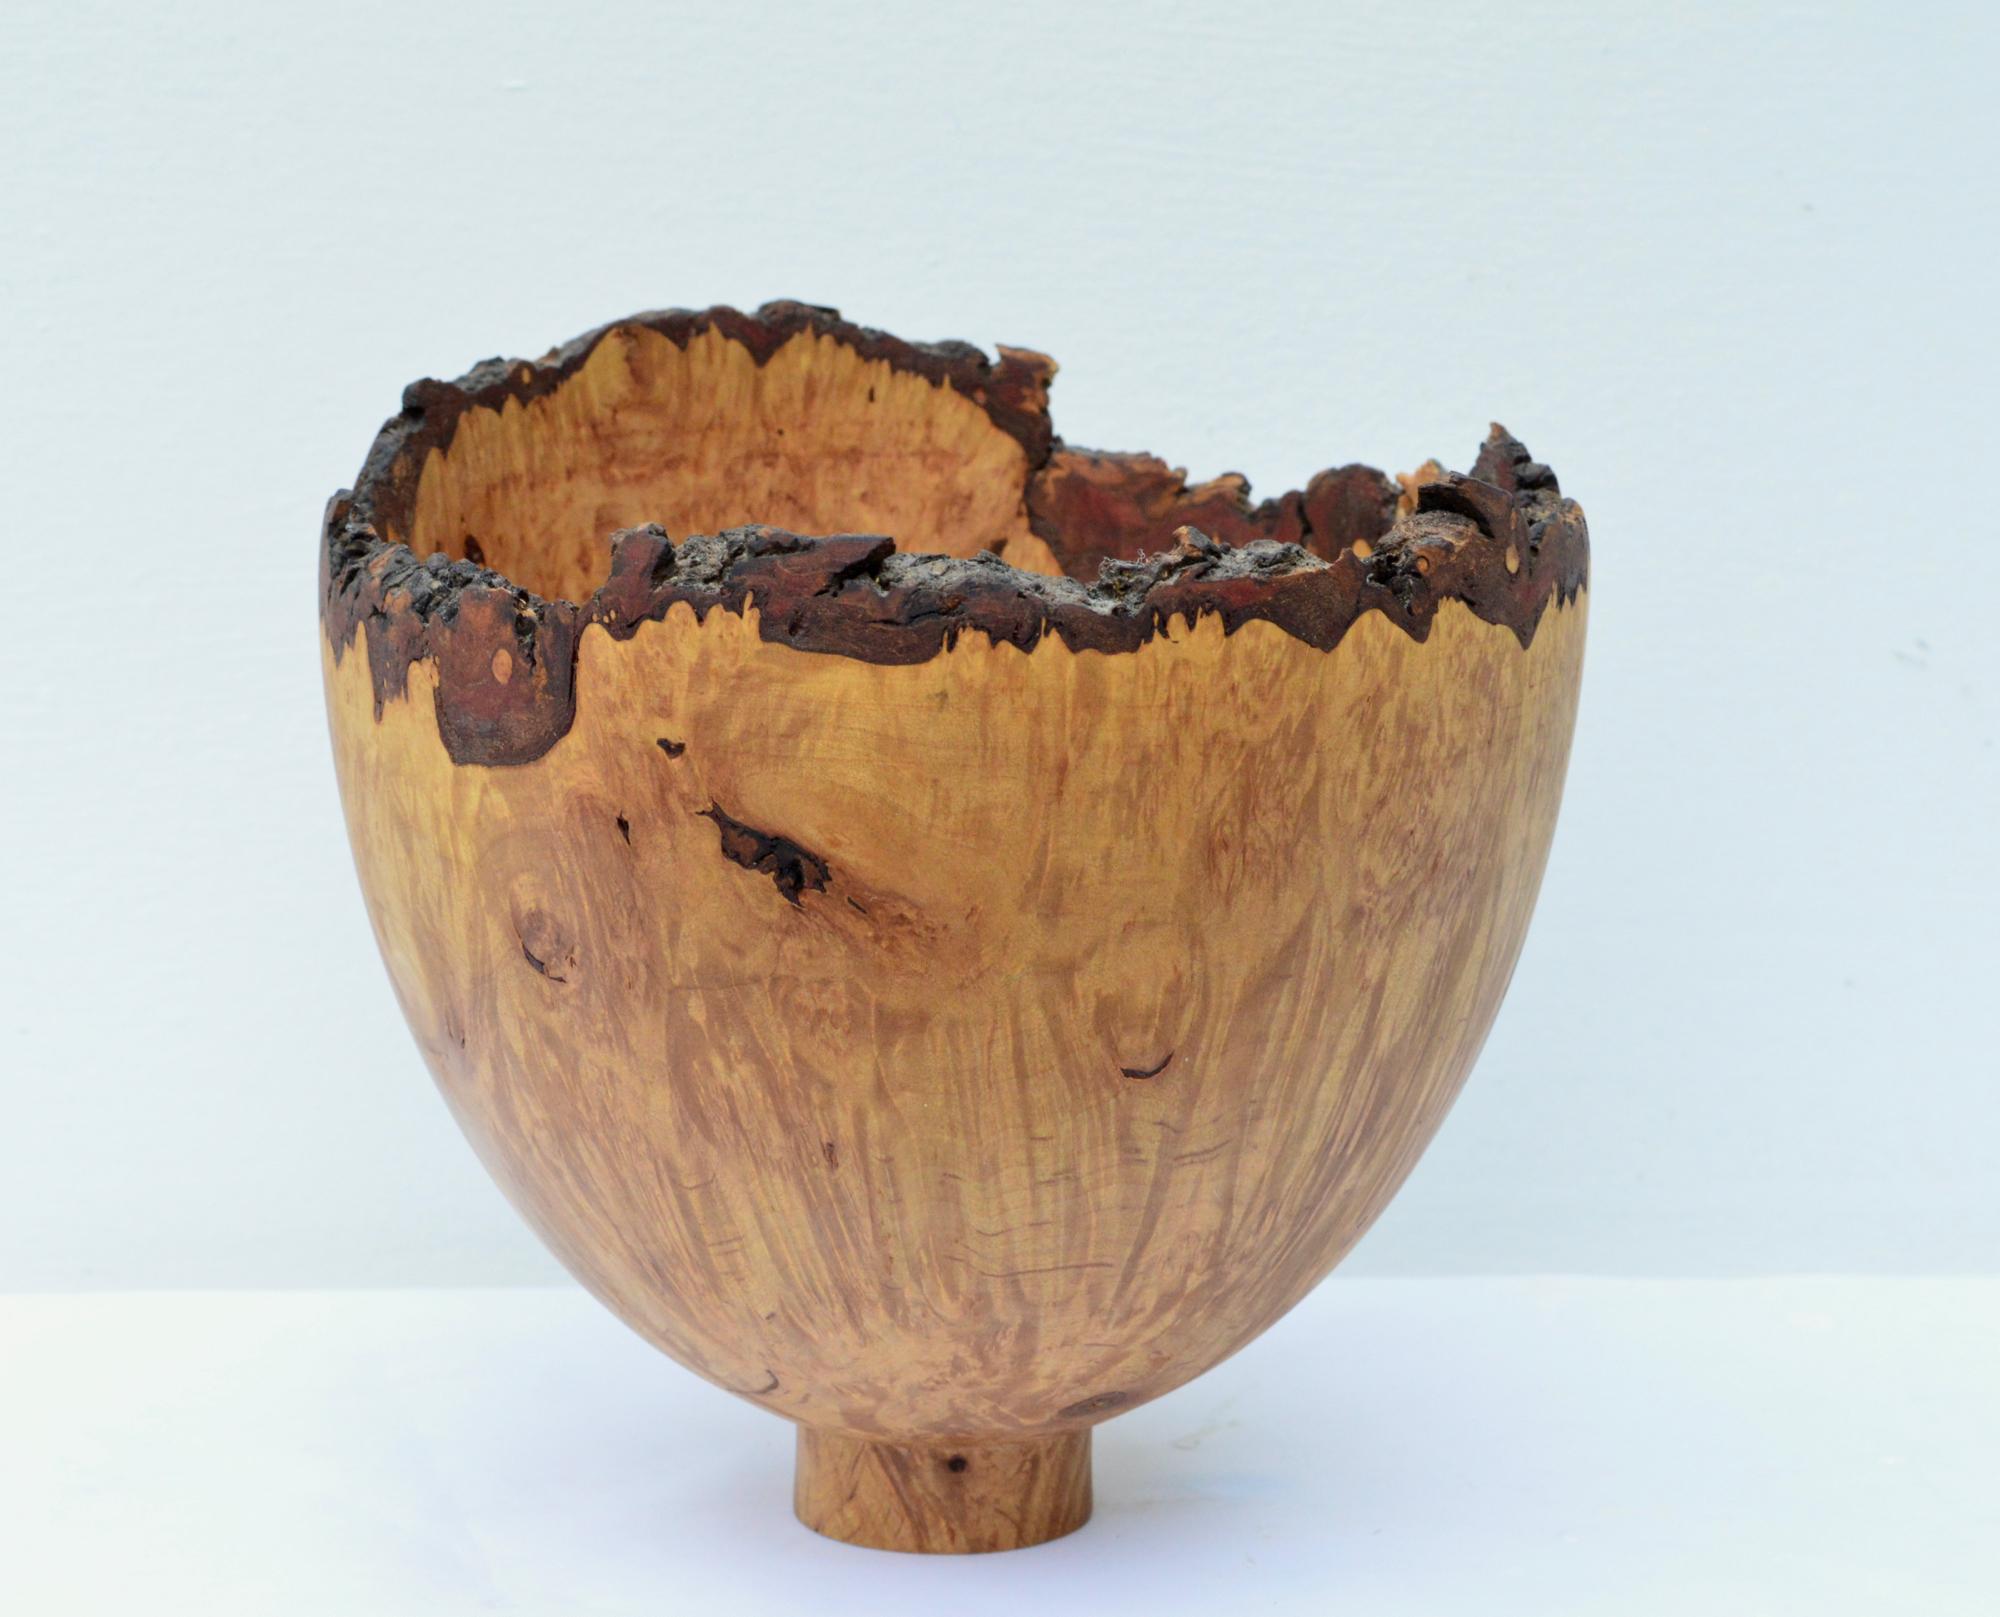 A breathtaking studio made decorative bowl of maple burl by DH Booth. Organic modern style with high end Craft aesthetic, this decorative wood compote will set ablaze your favorite bookshelf or coffee table vignette. Signed and dated underneath.